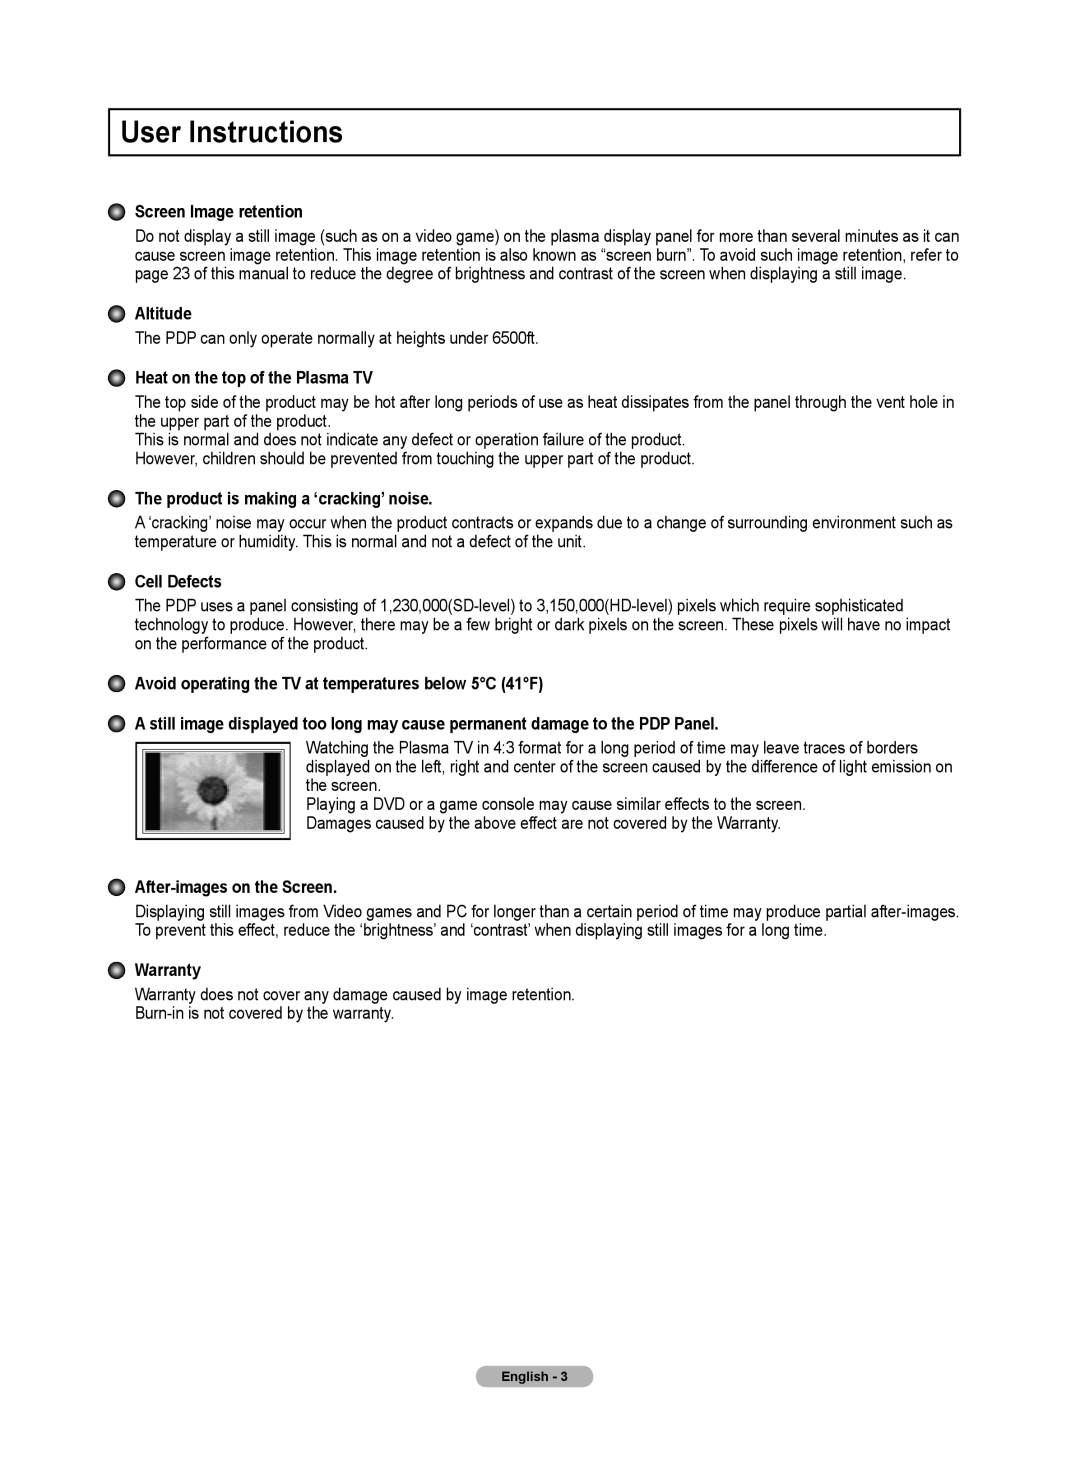 Samsung 510 User Instructions, Screen Image retention, Altitude, Heat on the top of the Plasma TV, Cell Defects, Warranty 